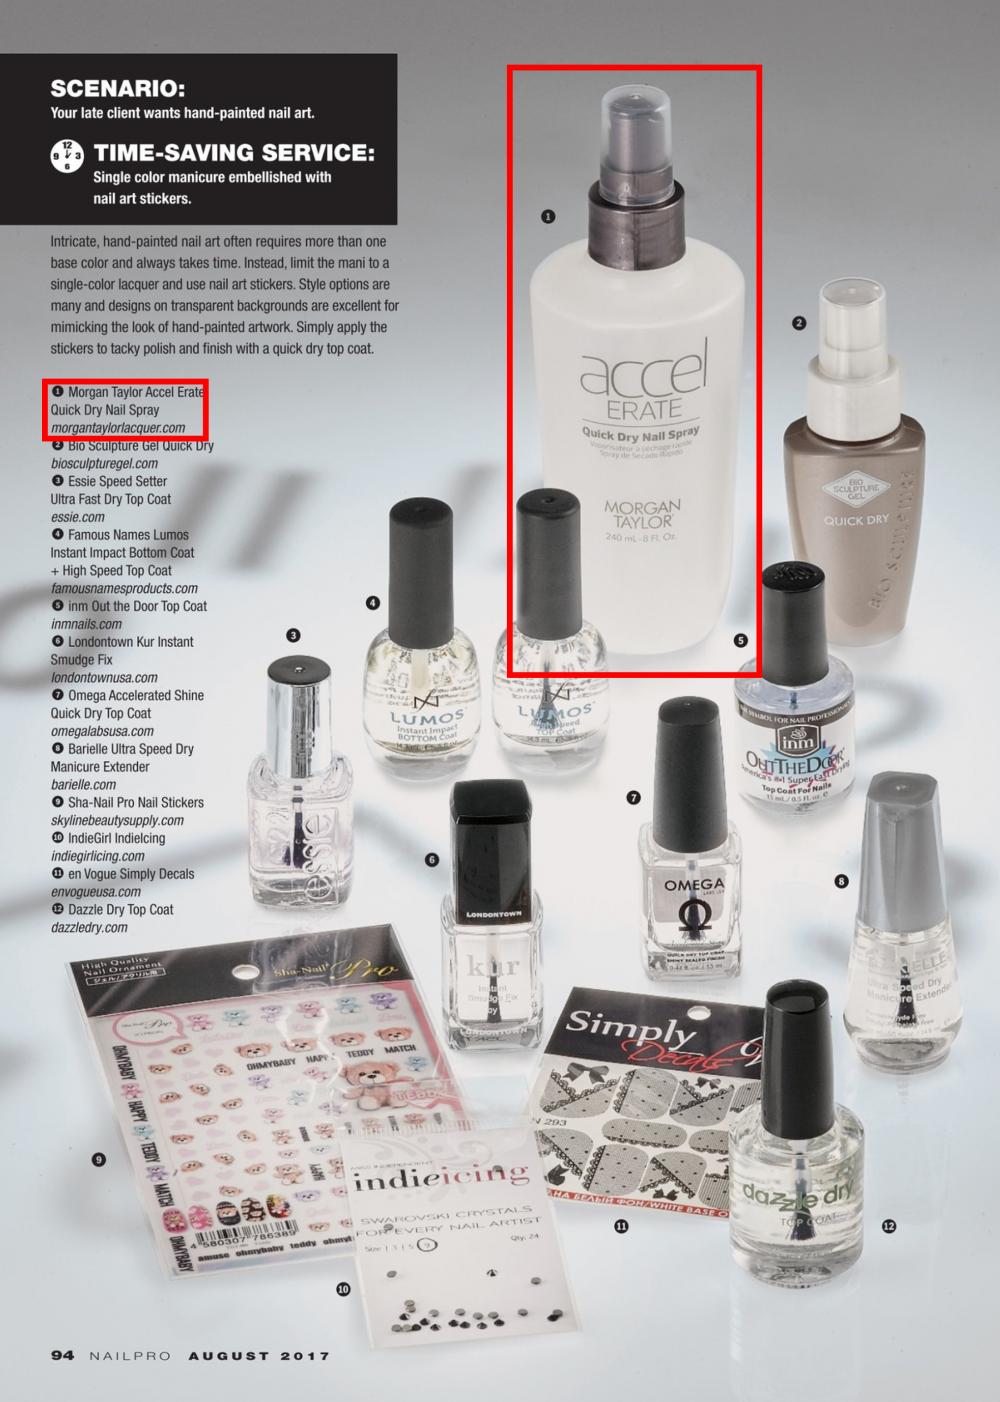 NAILPRO - August, 2017